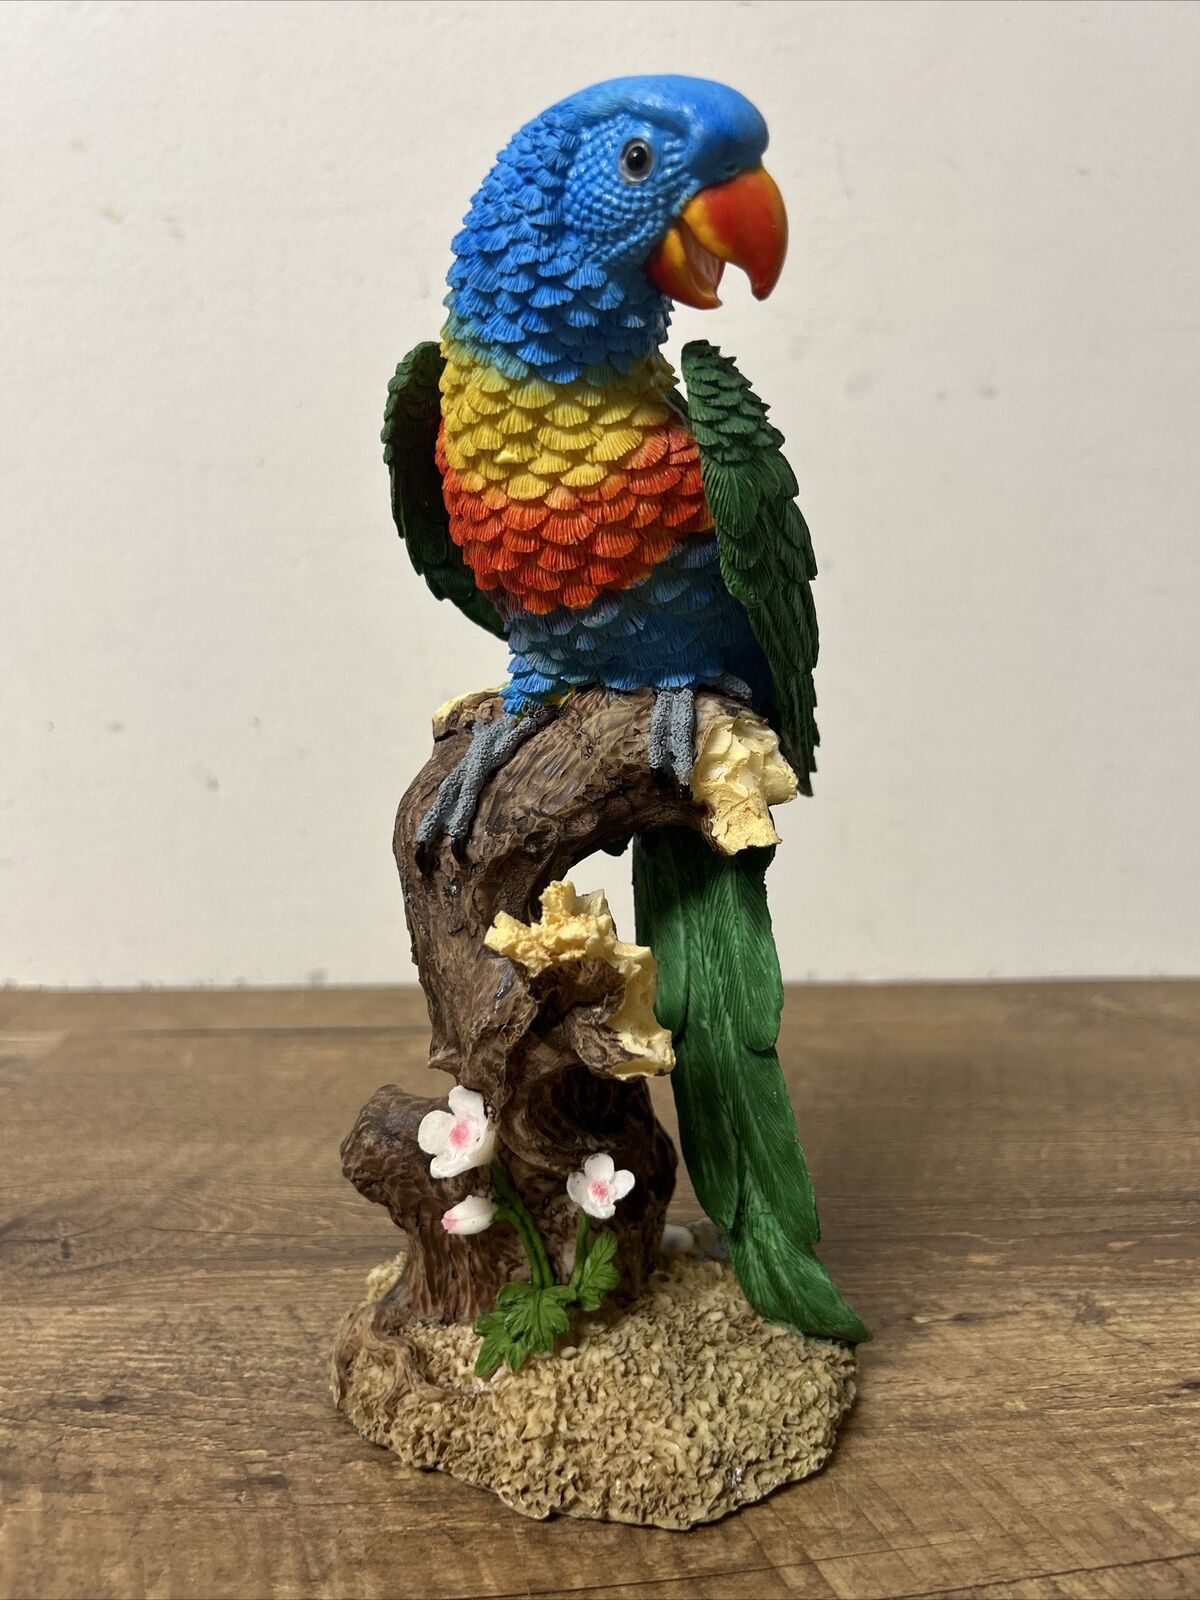 Vintage tropical Parrot Macaw Figurine Colorful Bird Figure 9” tall (Resin)